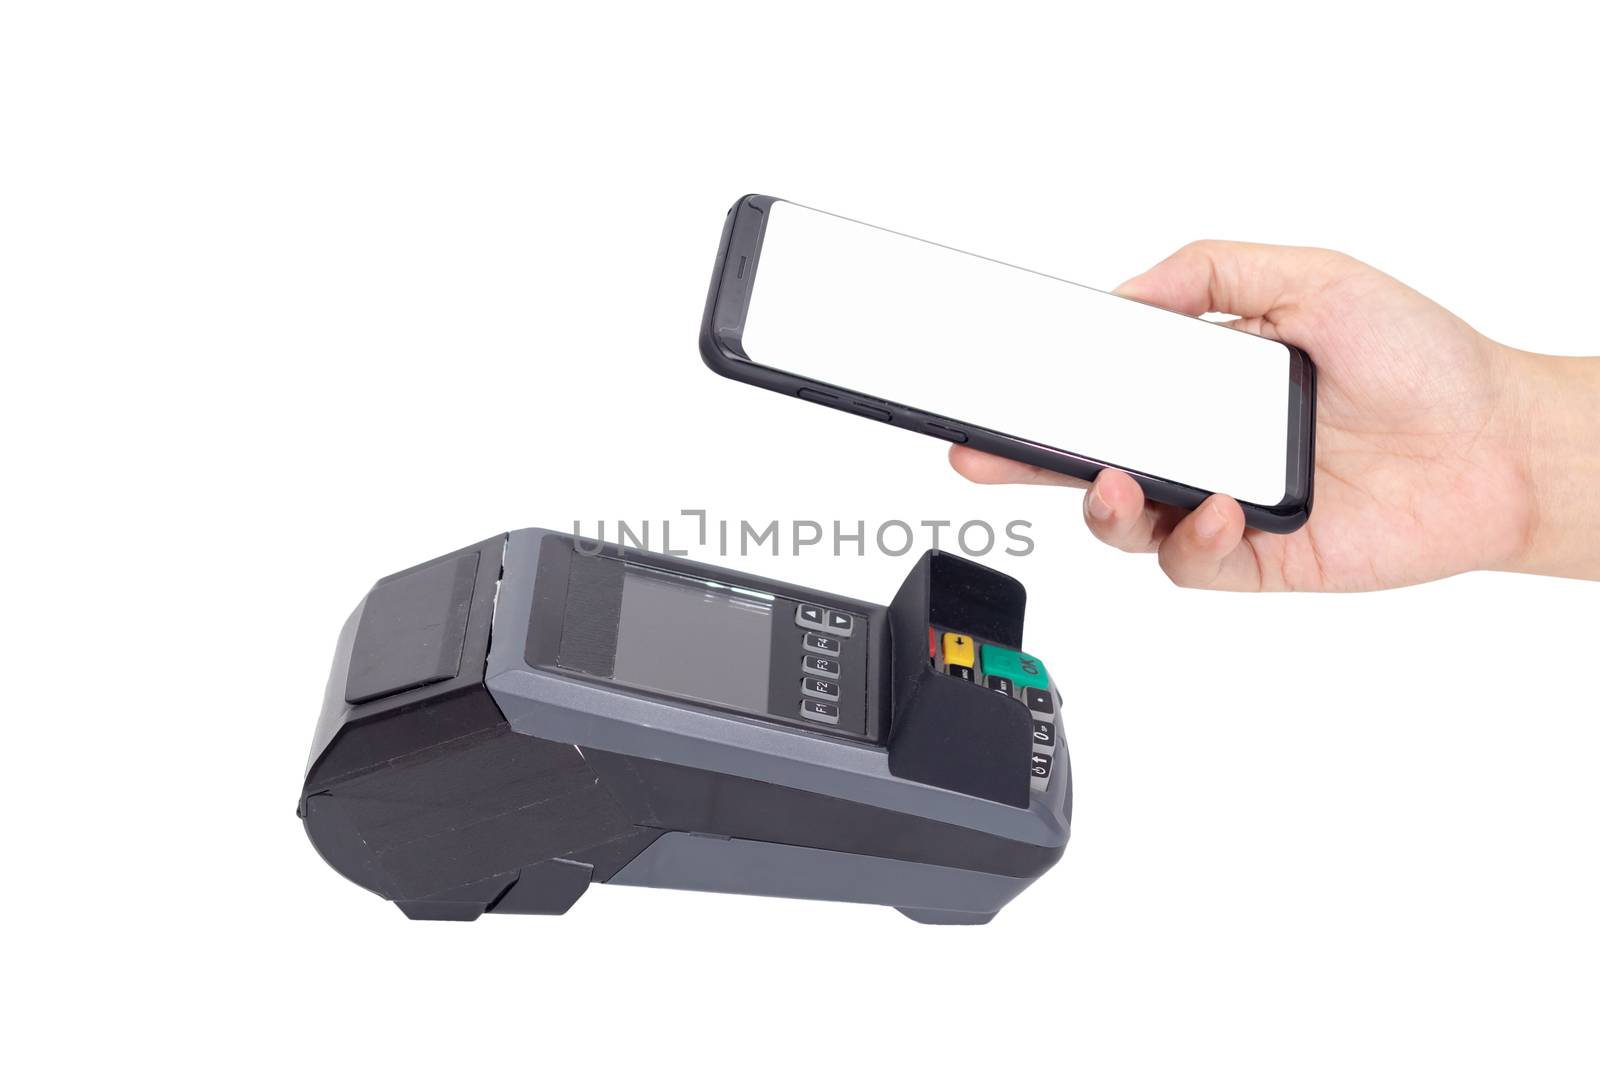 cashless Society, customer paying bill through smartphone using NFC technology at point of sale terminal with clipping path. contactless by mobile digital wallet technology concept by asiandelight